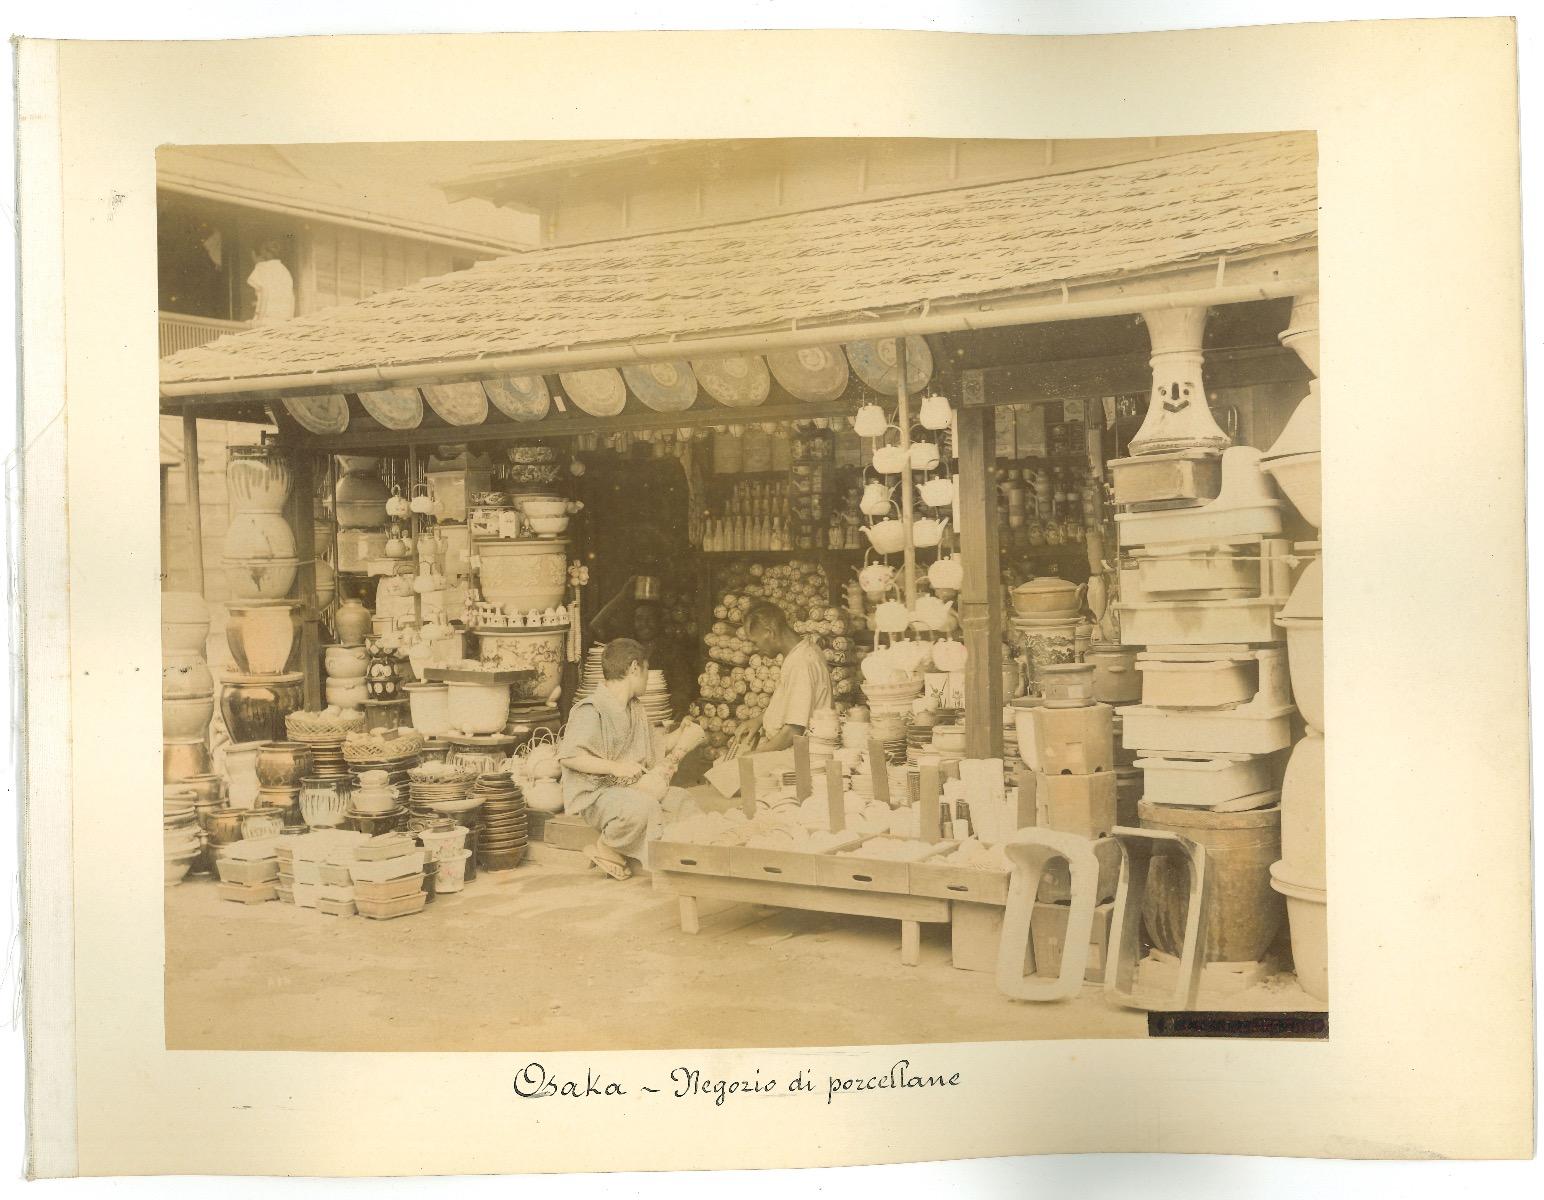 Ancient Japanese Ethnographic photos from Osaka - Albumen Prints - 1880s/90s - Photograph by Unknown